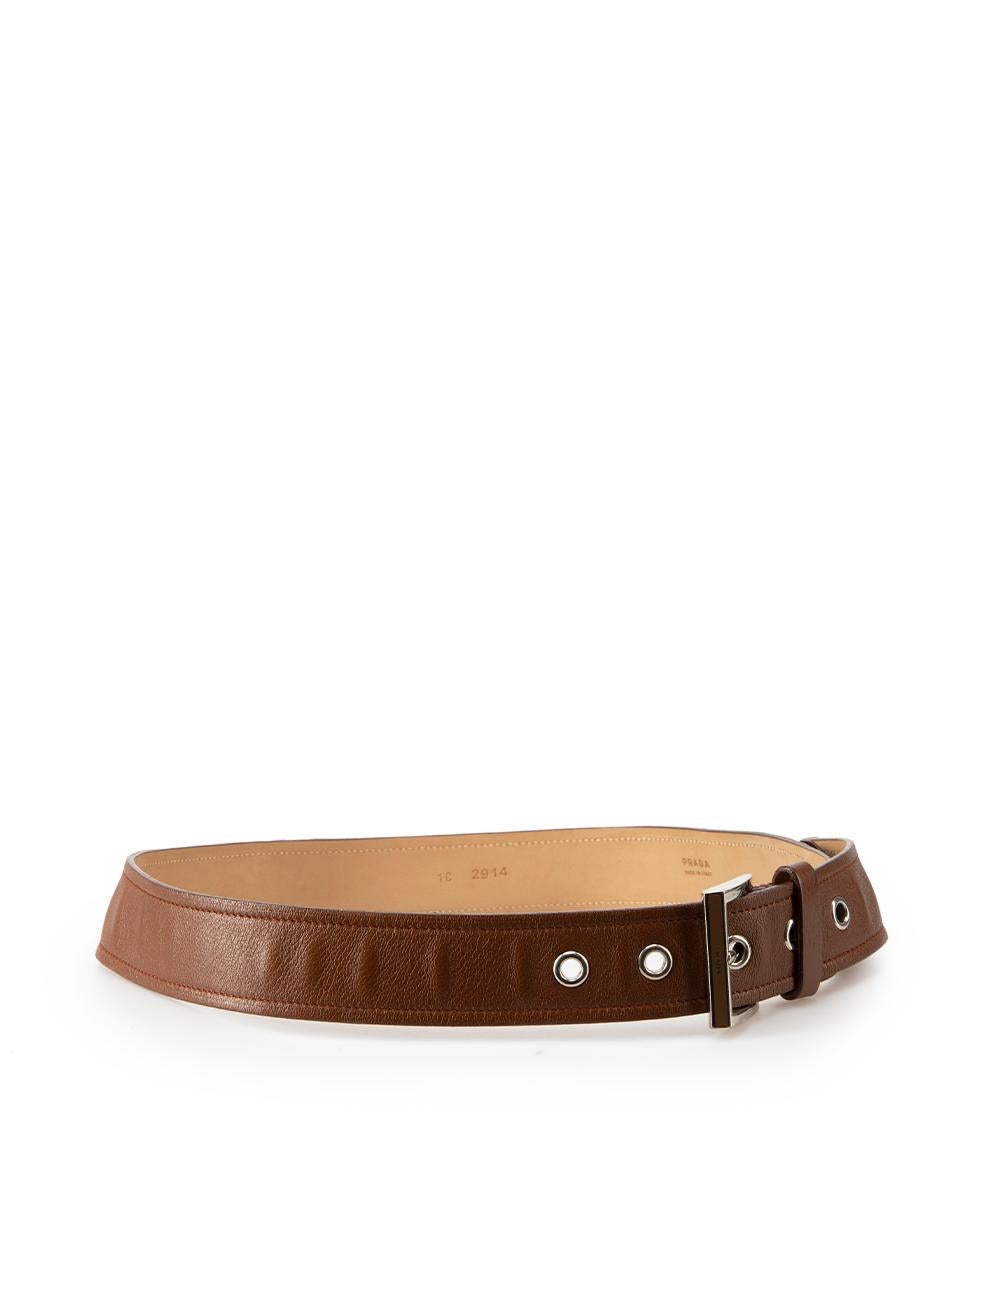 CONDITION is Good. Minor wear to belt is evident. Light wear to edge painting in places where the two leather layers have split, some light tarnishing and scratches also seen at buckle on this used Prada designer resale